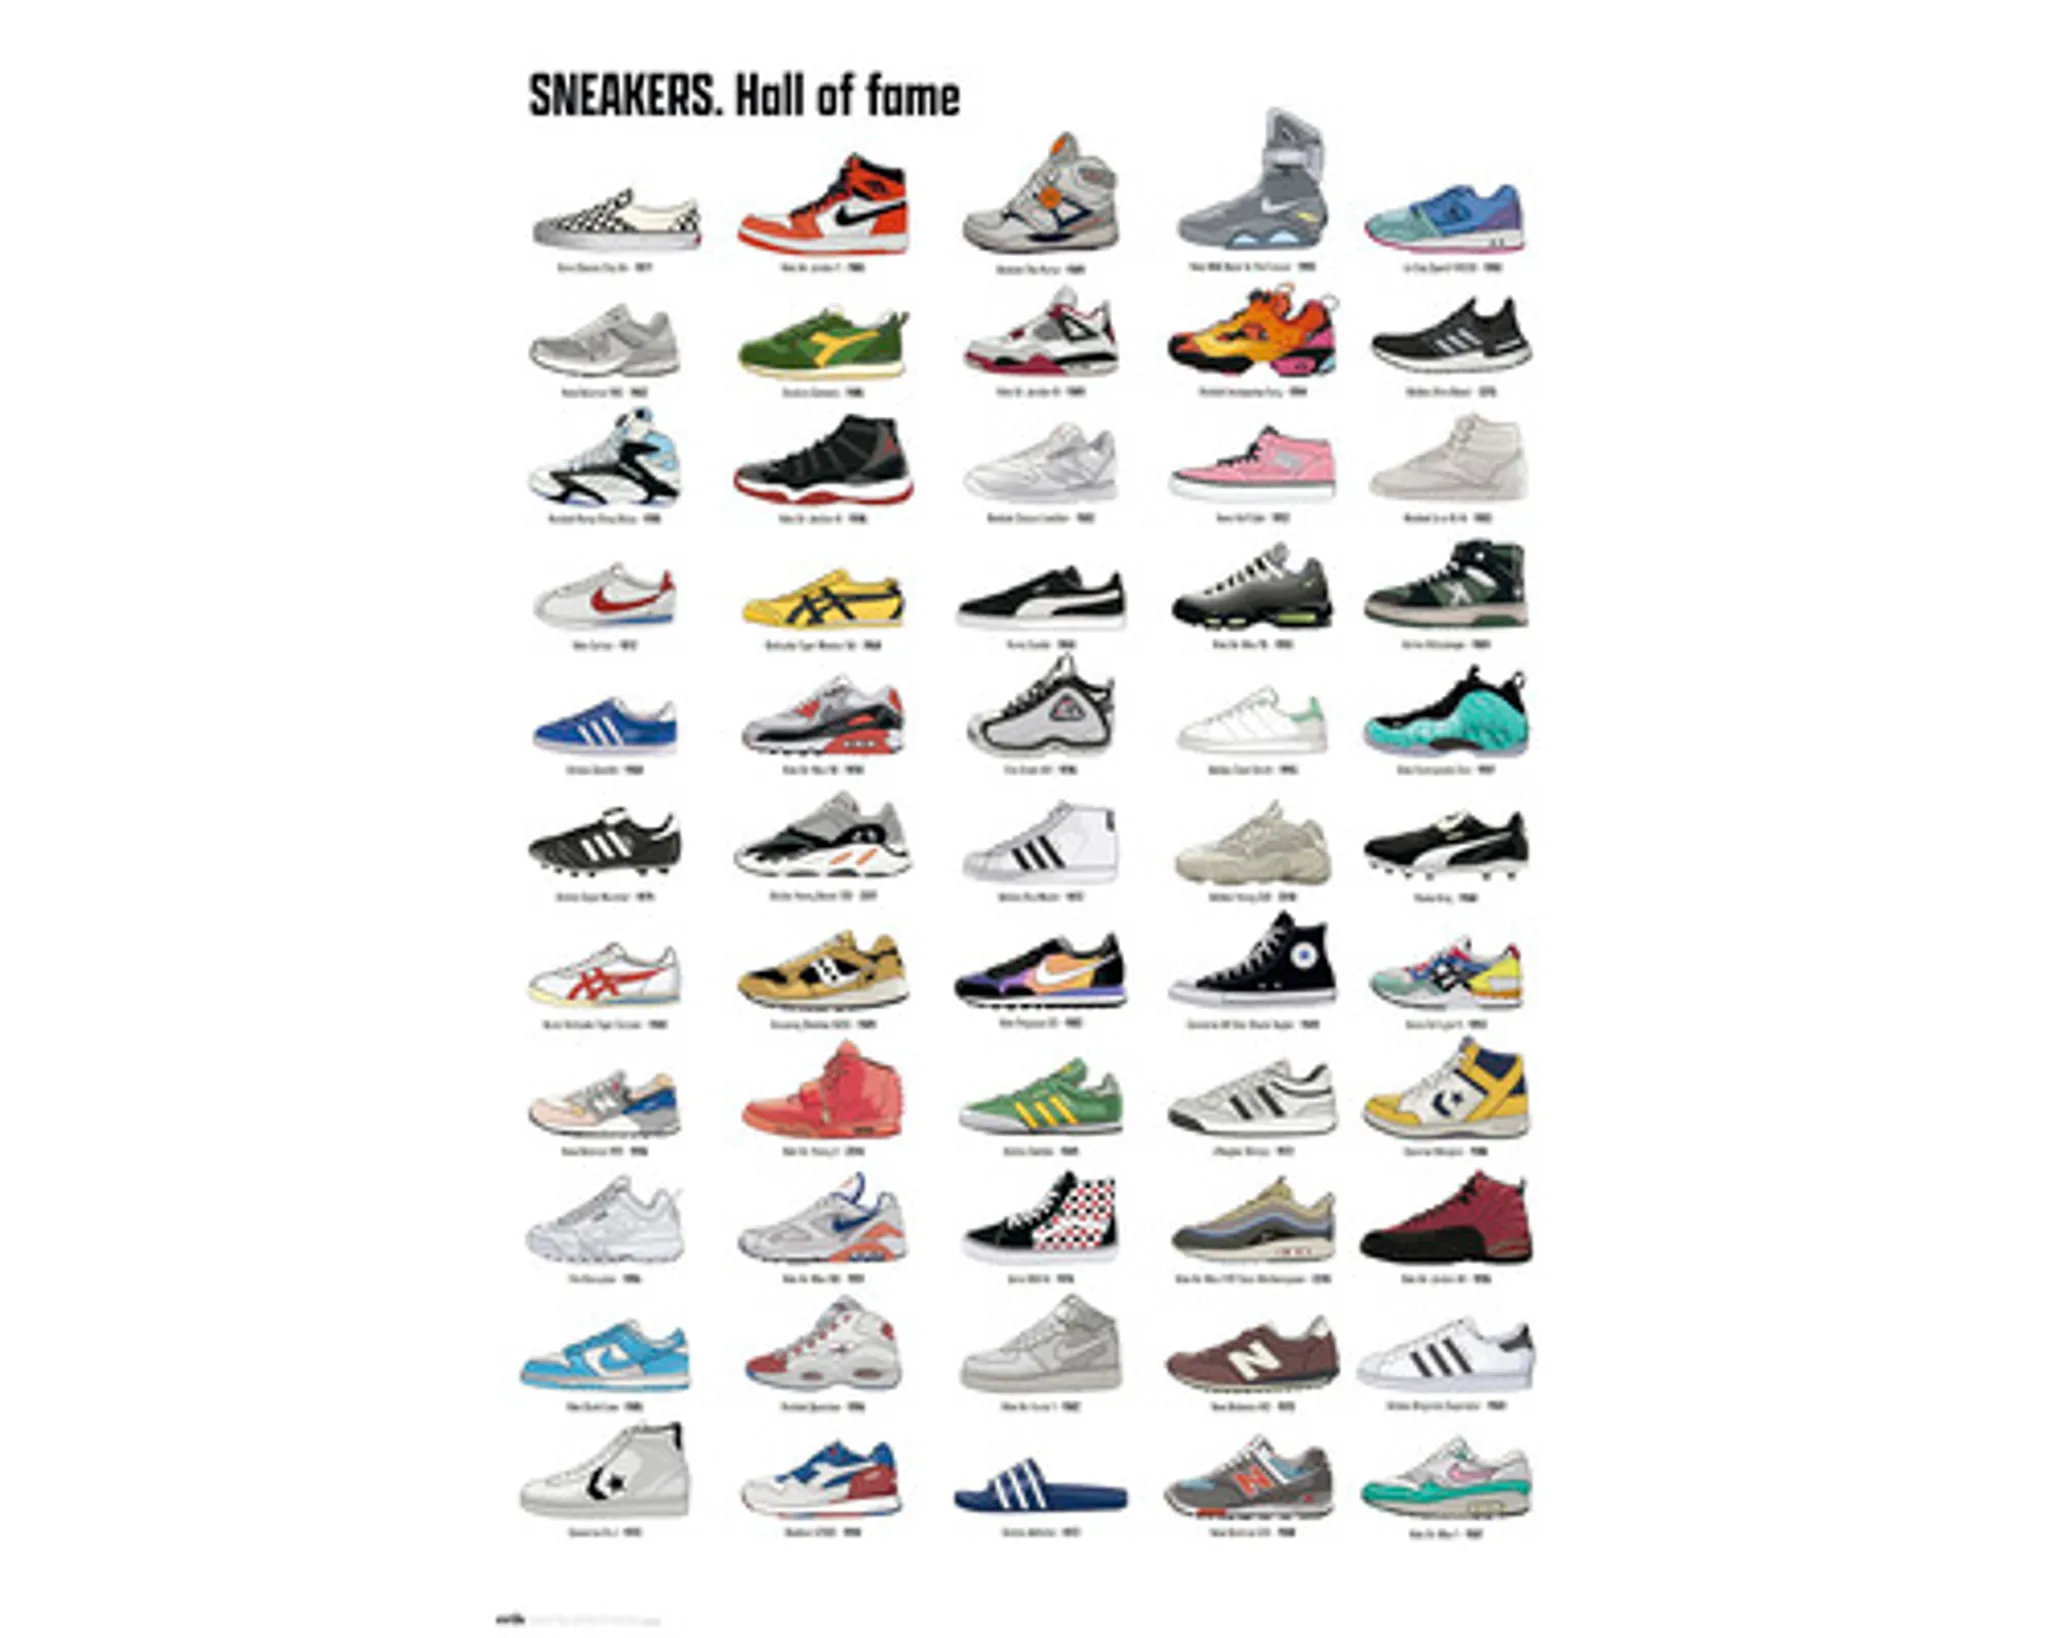 Maxiposter Sneakers hall of fame 61x91,5 cm